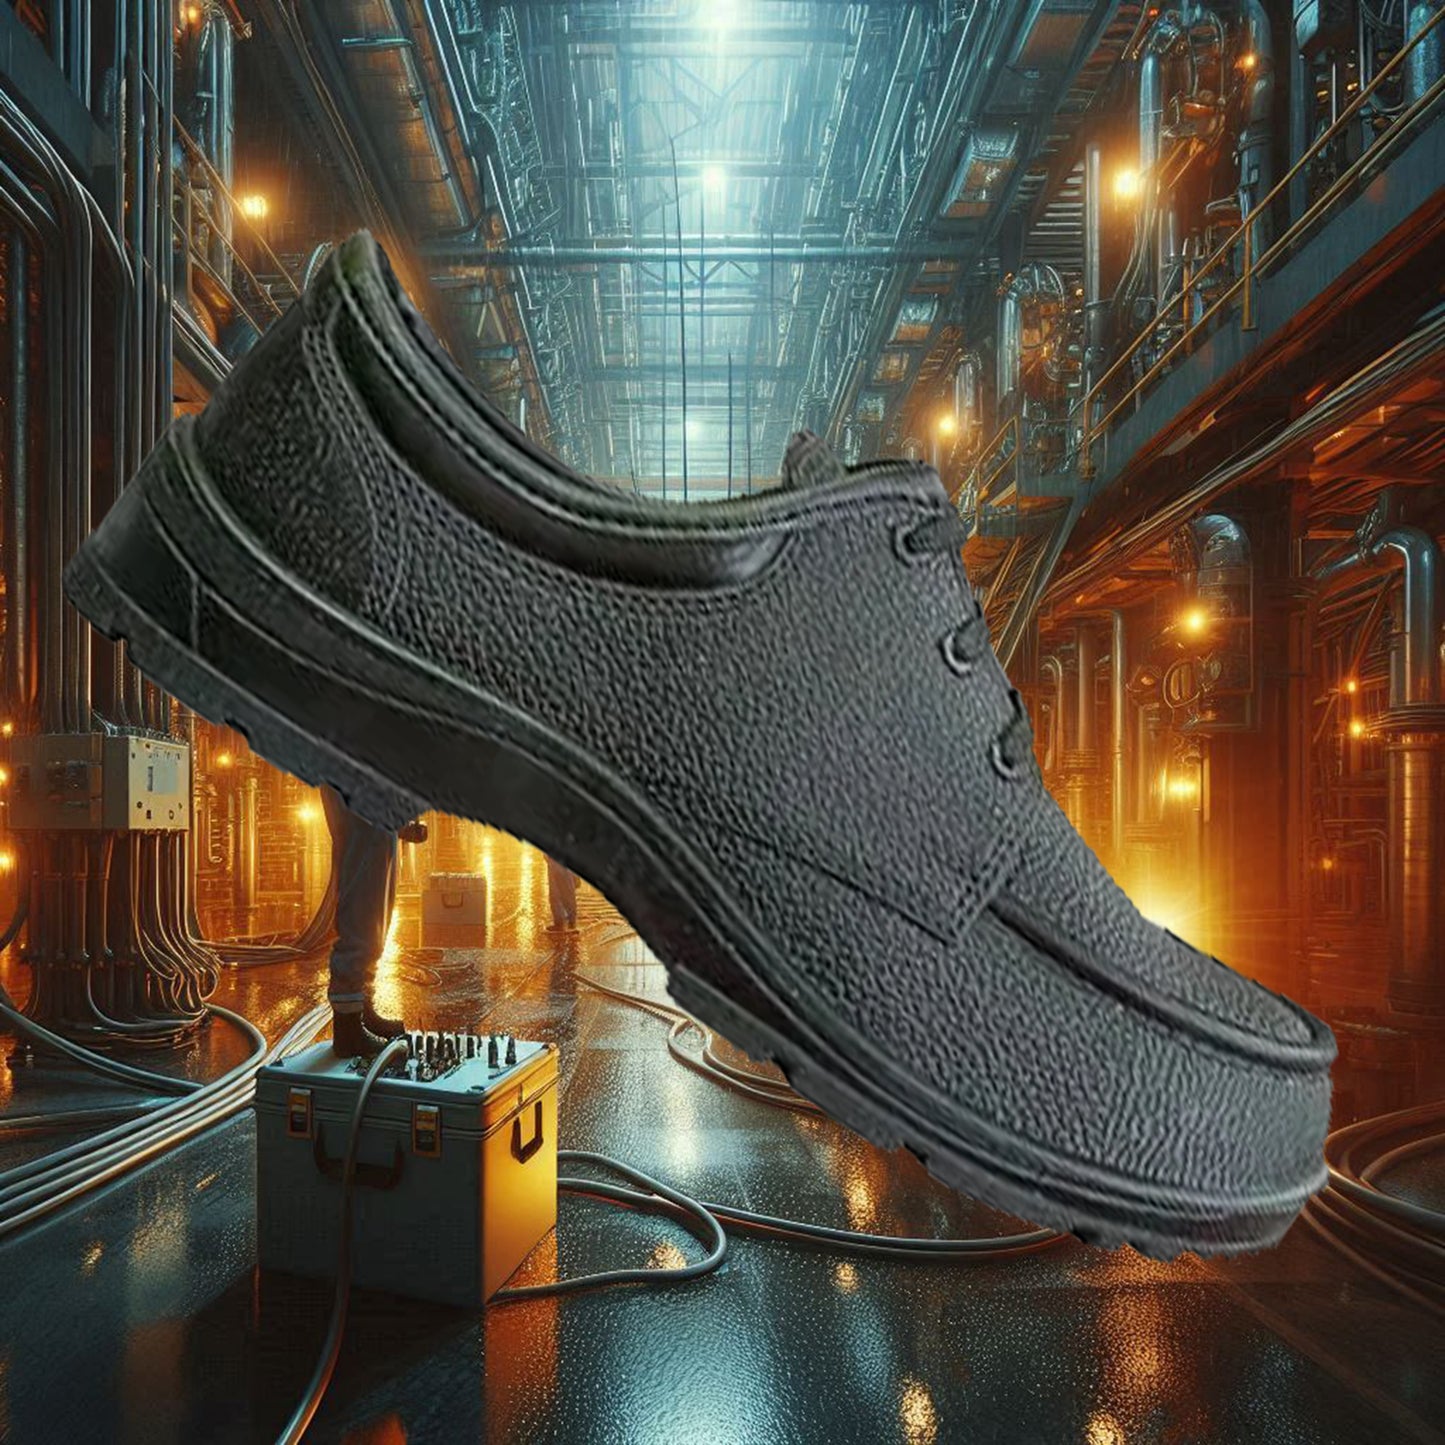 Introducing Topper Derby: The Ultimate Safety Shoes for Construction Workers